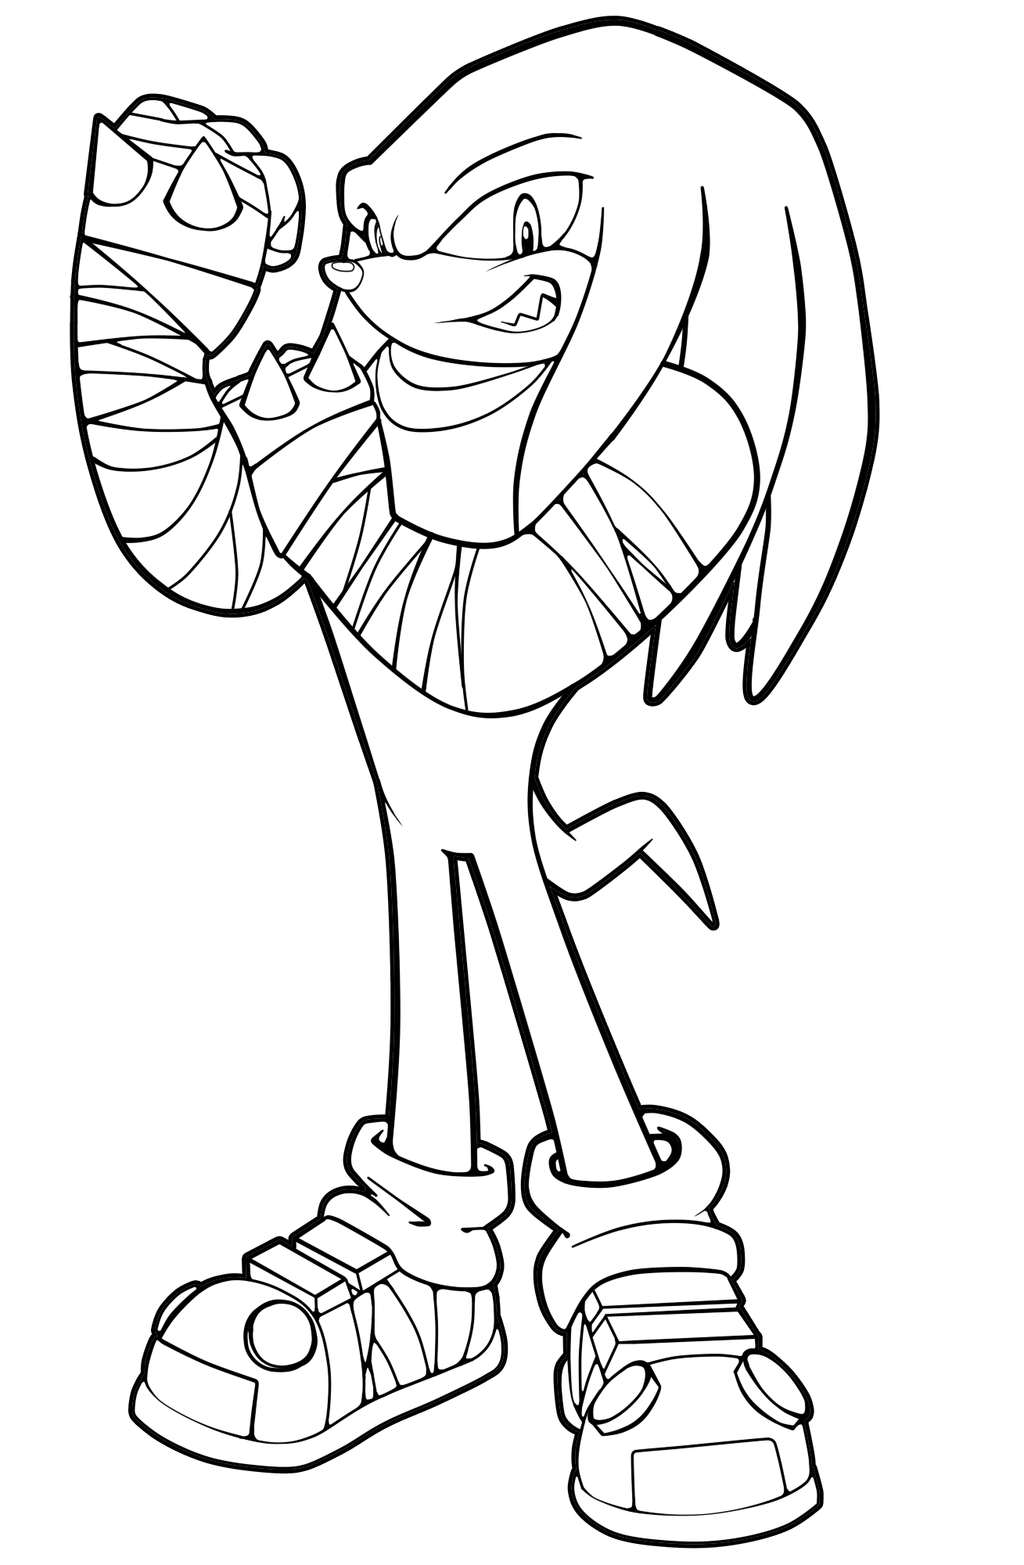 Silver The Hedgehog Coloring Pages: Sonic Style Coloring Pages